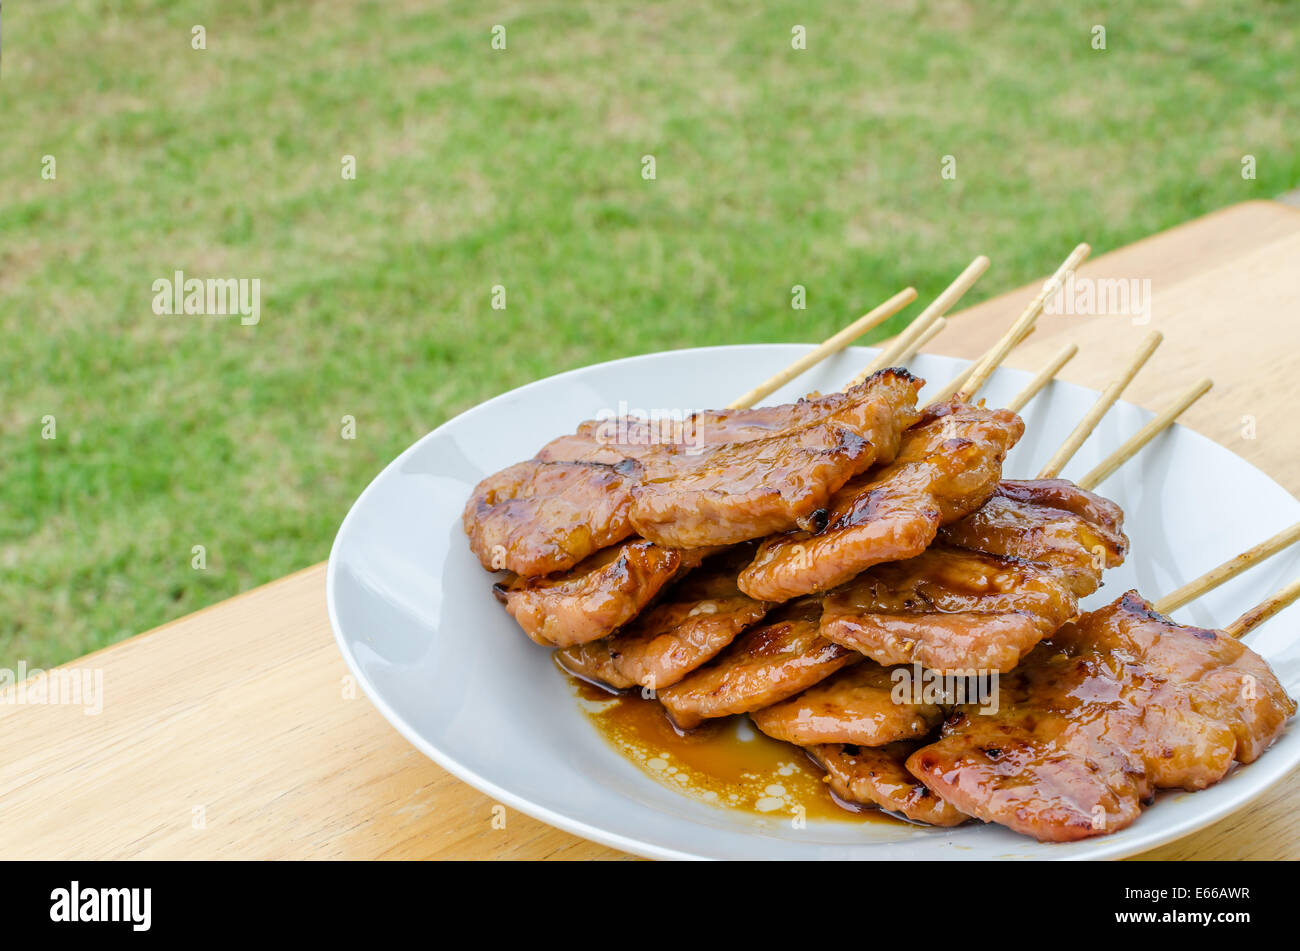 Thai Style Bbq Grilled Pork Or Moo Ping Stock Photo Alamy